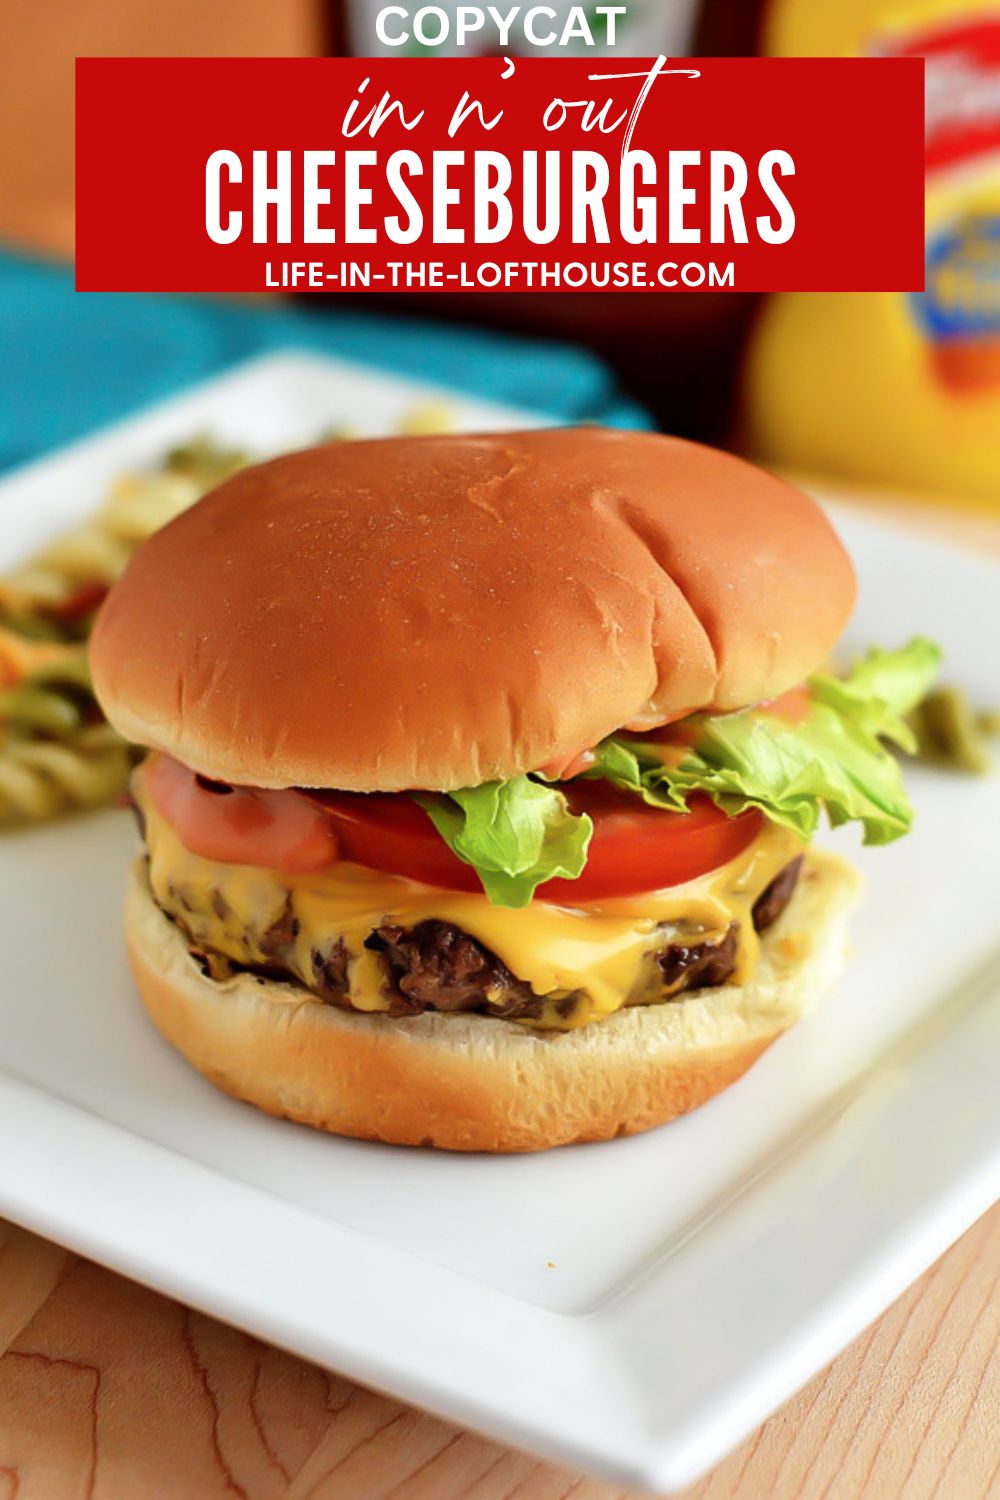 Juicy and flavorful cheeseburgers fresh off the grill that are smothered in a delicious "secret sauce". Life-in-the-Lofthouse.com